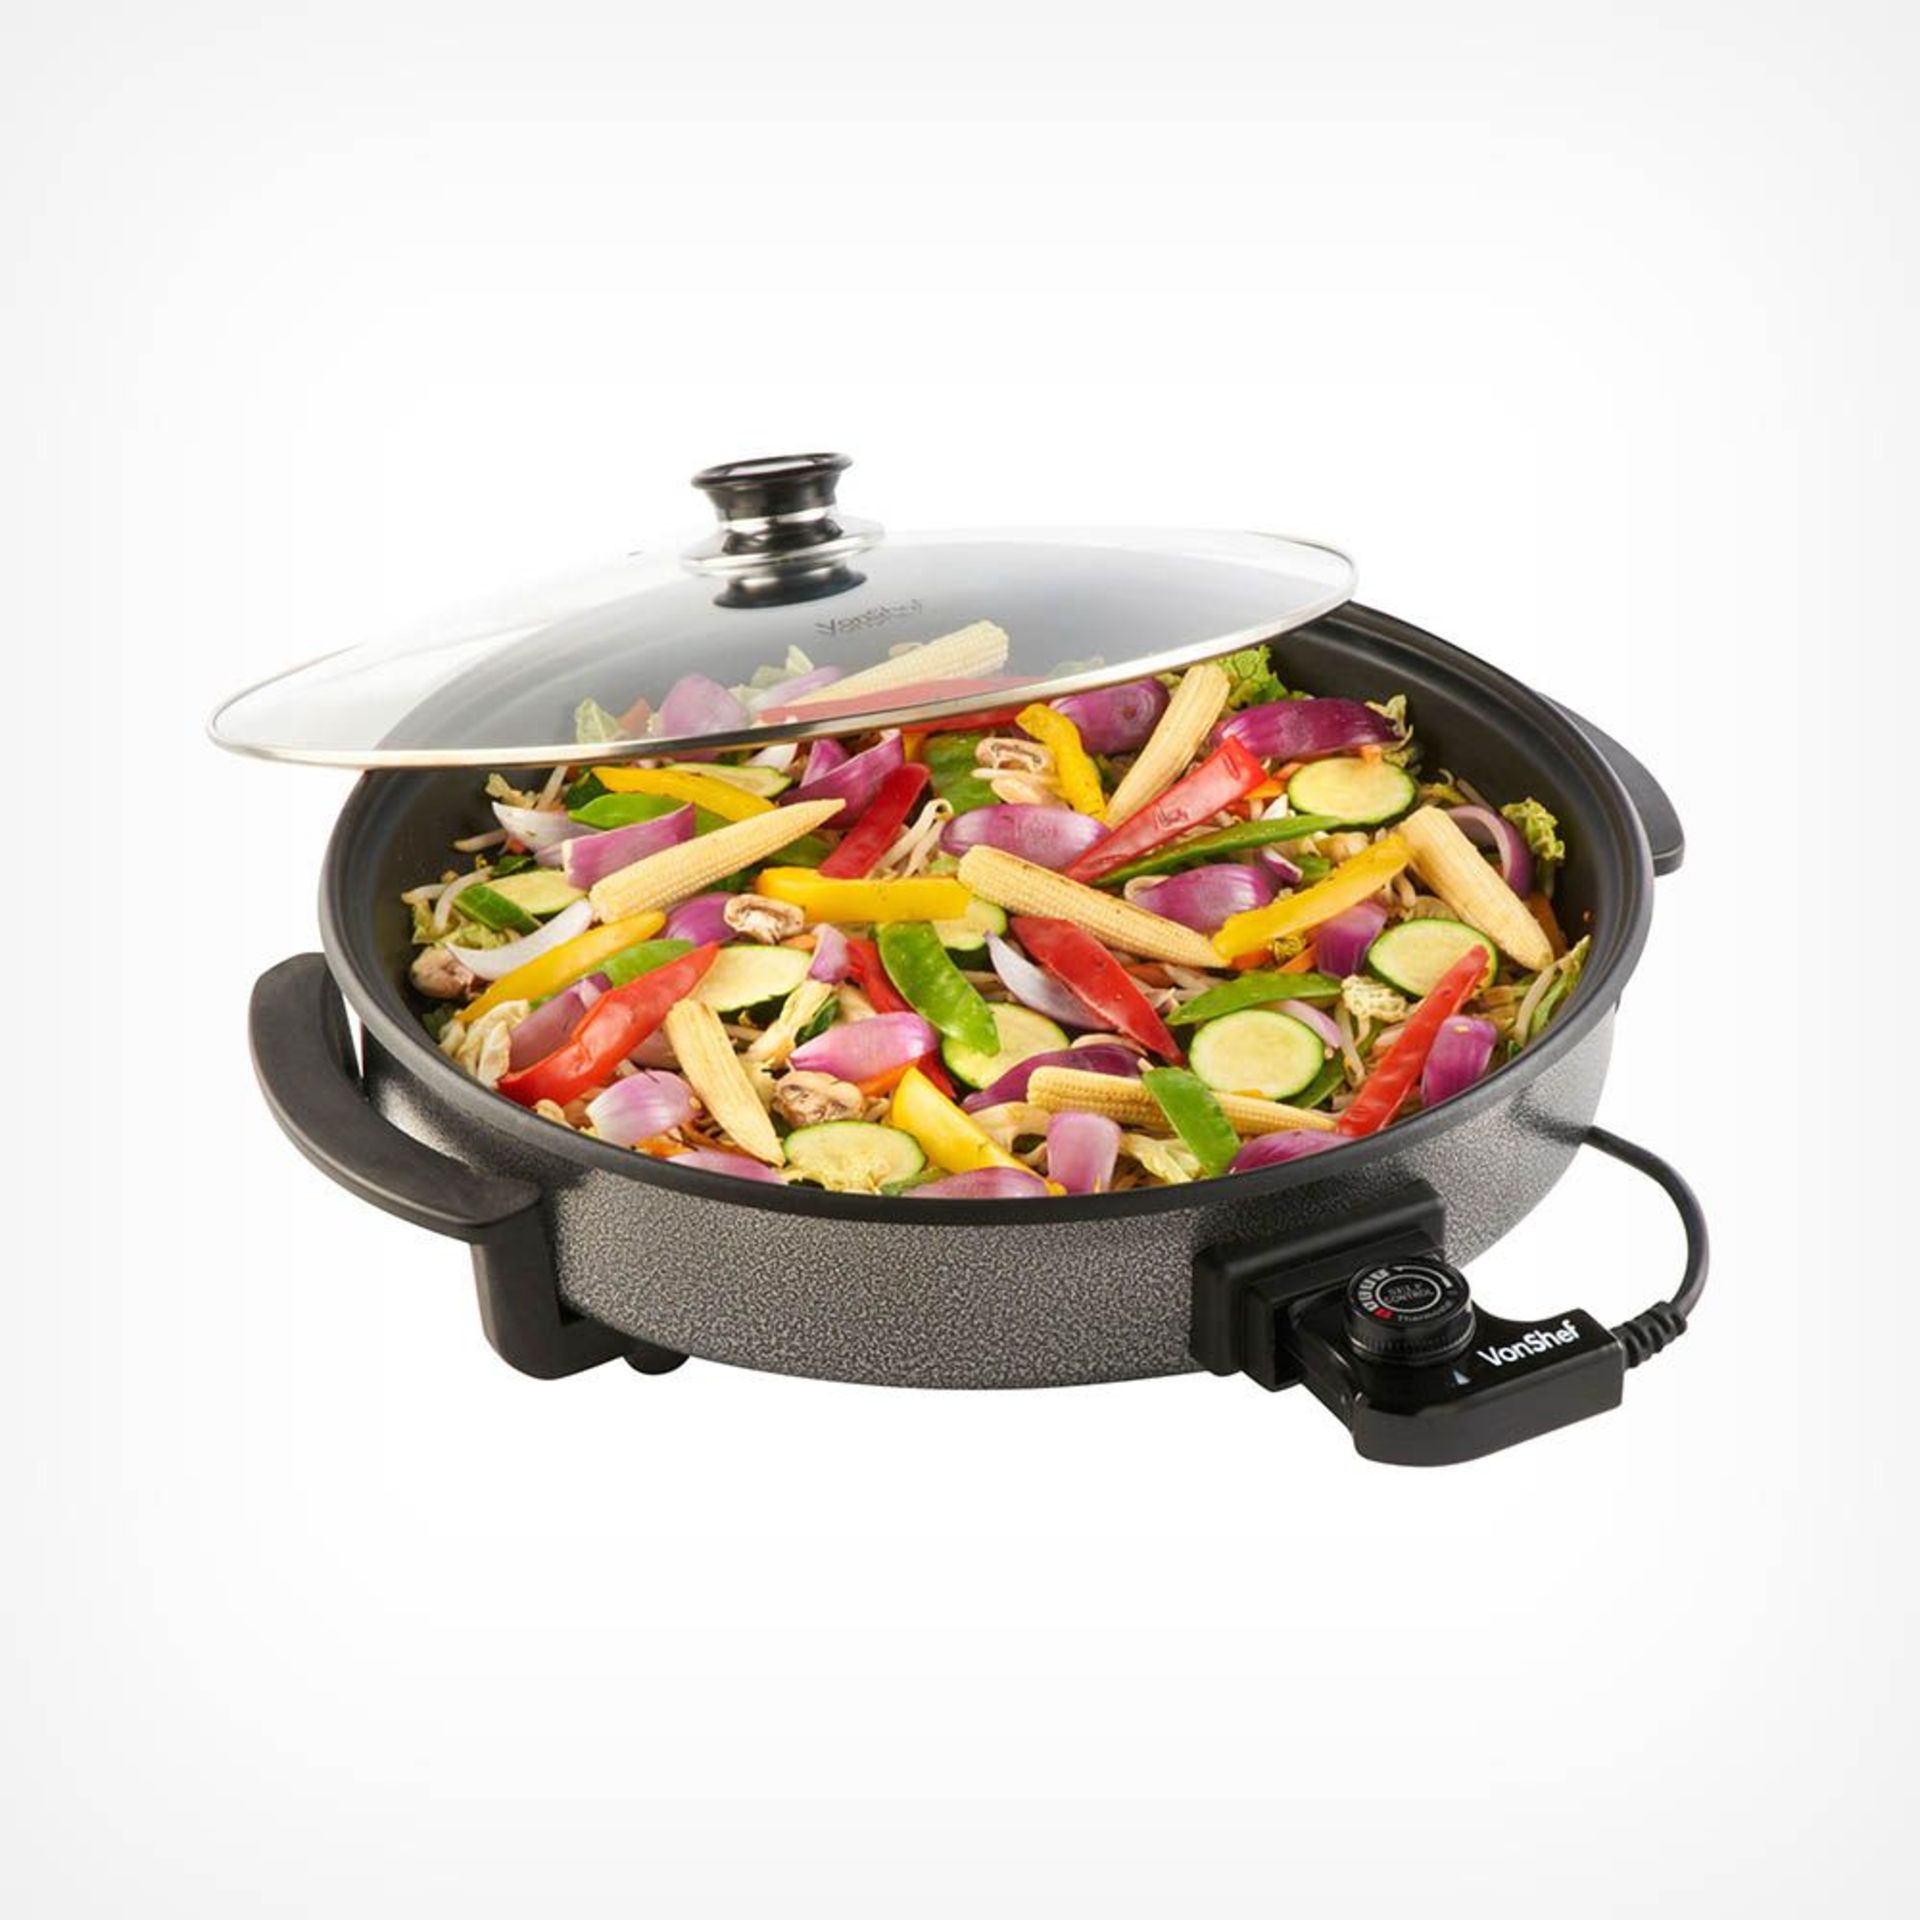 42cm Multi Cooker. - BI. The VonShef 42cm Multi Cooker is a must for the modern kitchen, making